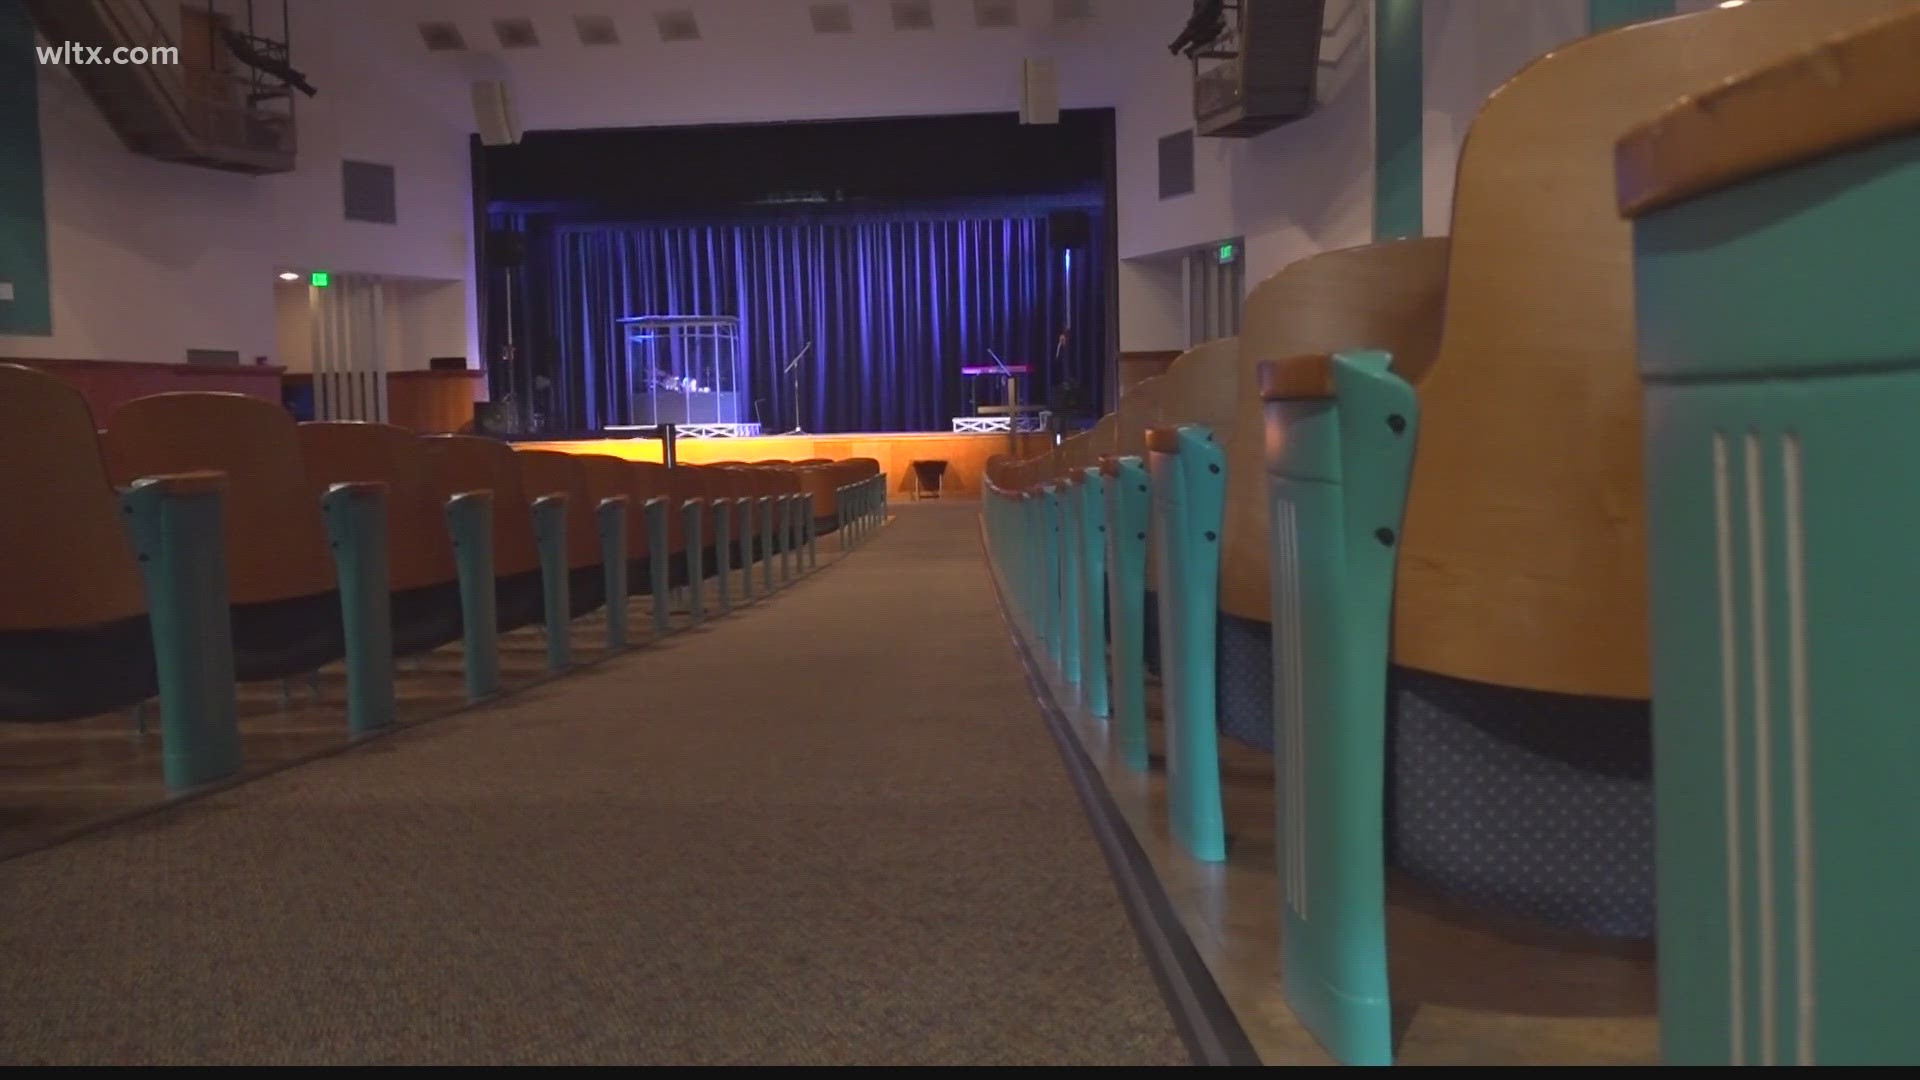 City council approved a series of recommendations created by a group of community members for the Weldon Auditorium.